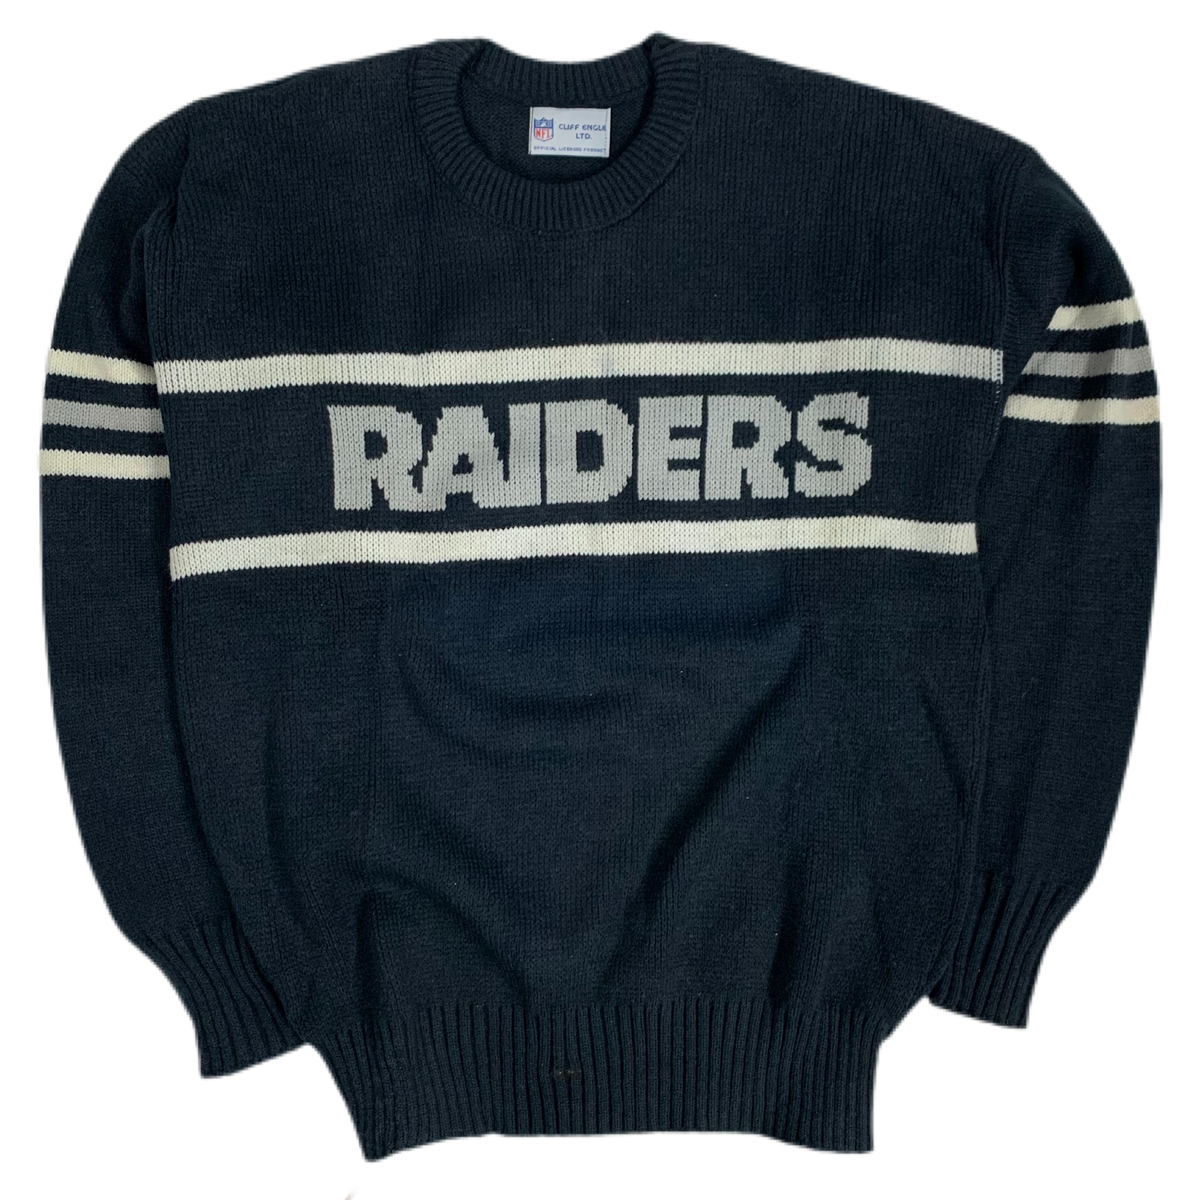 Vintage Raiders “Cliff Engle” Knit Sweater